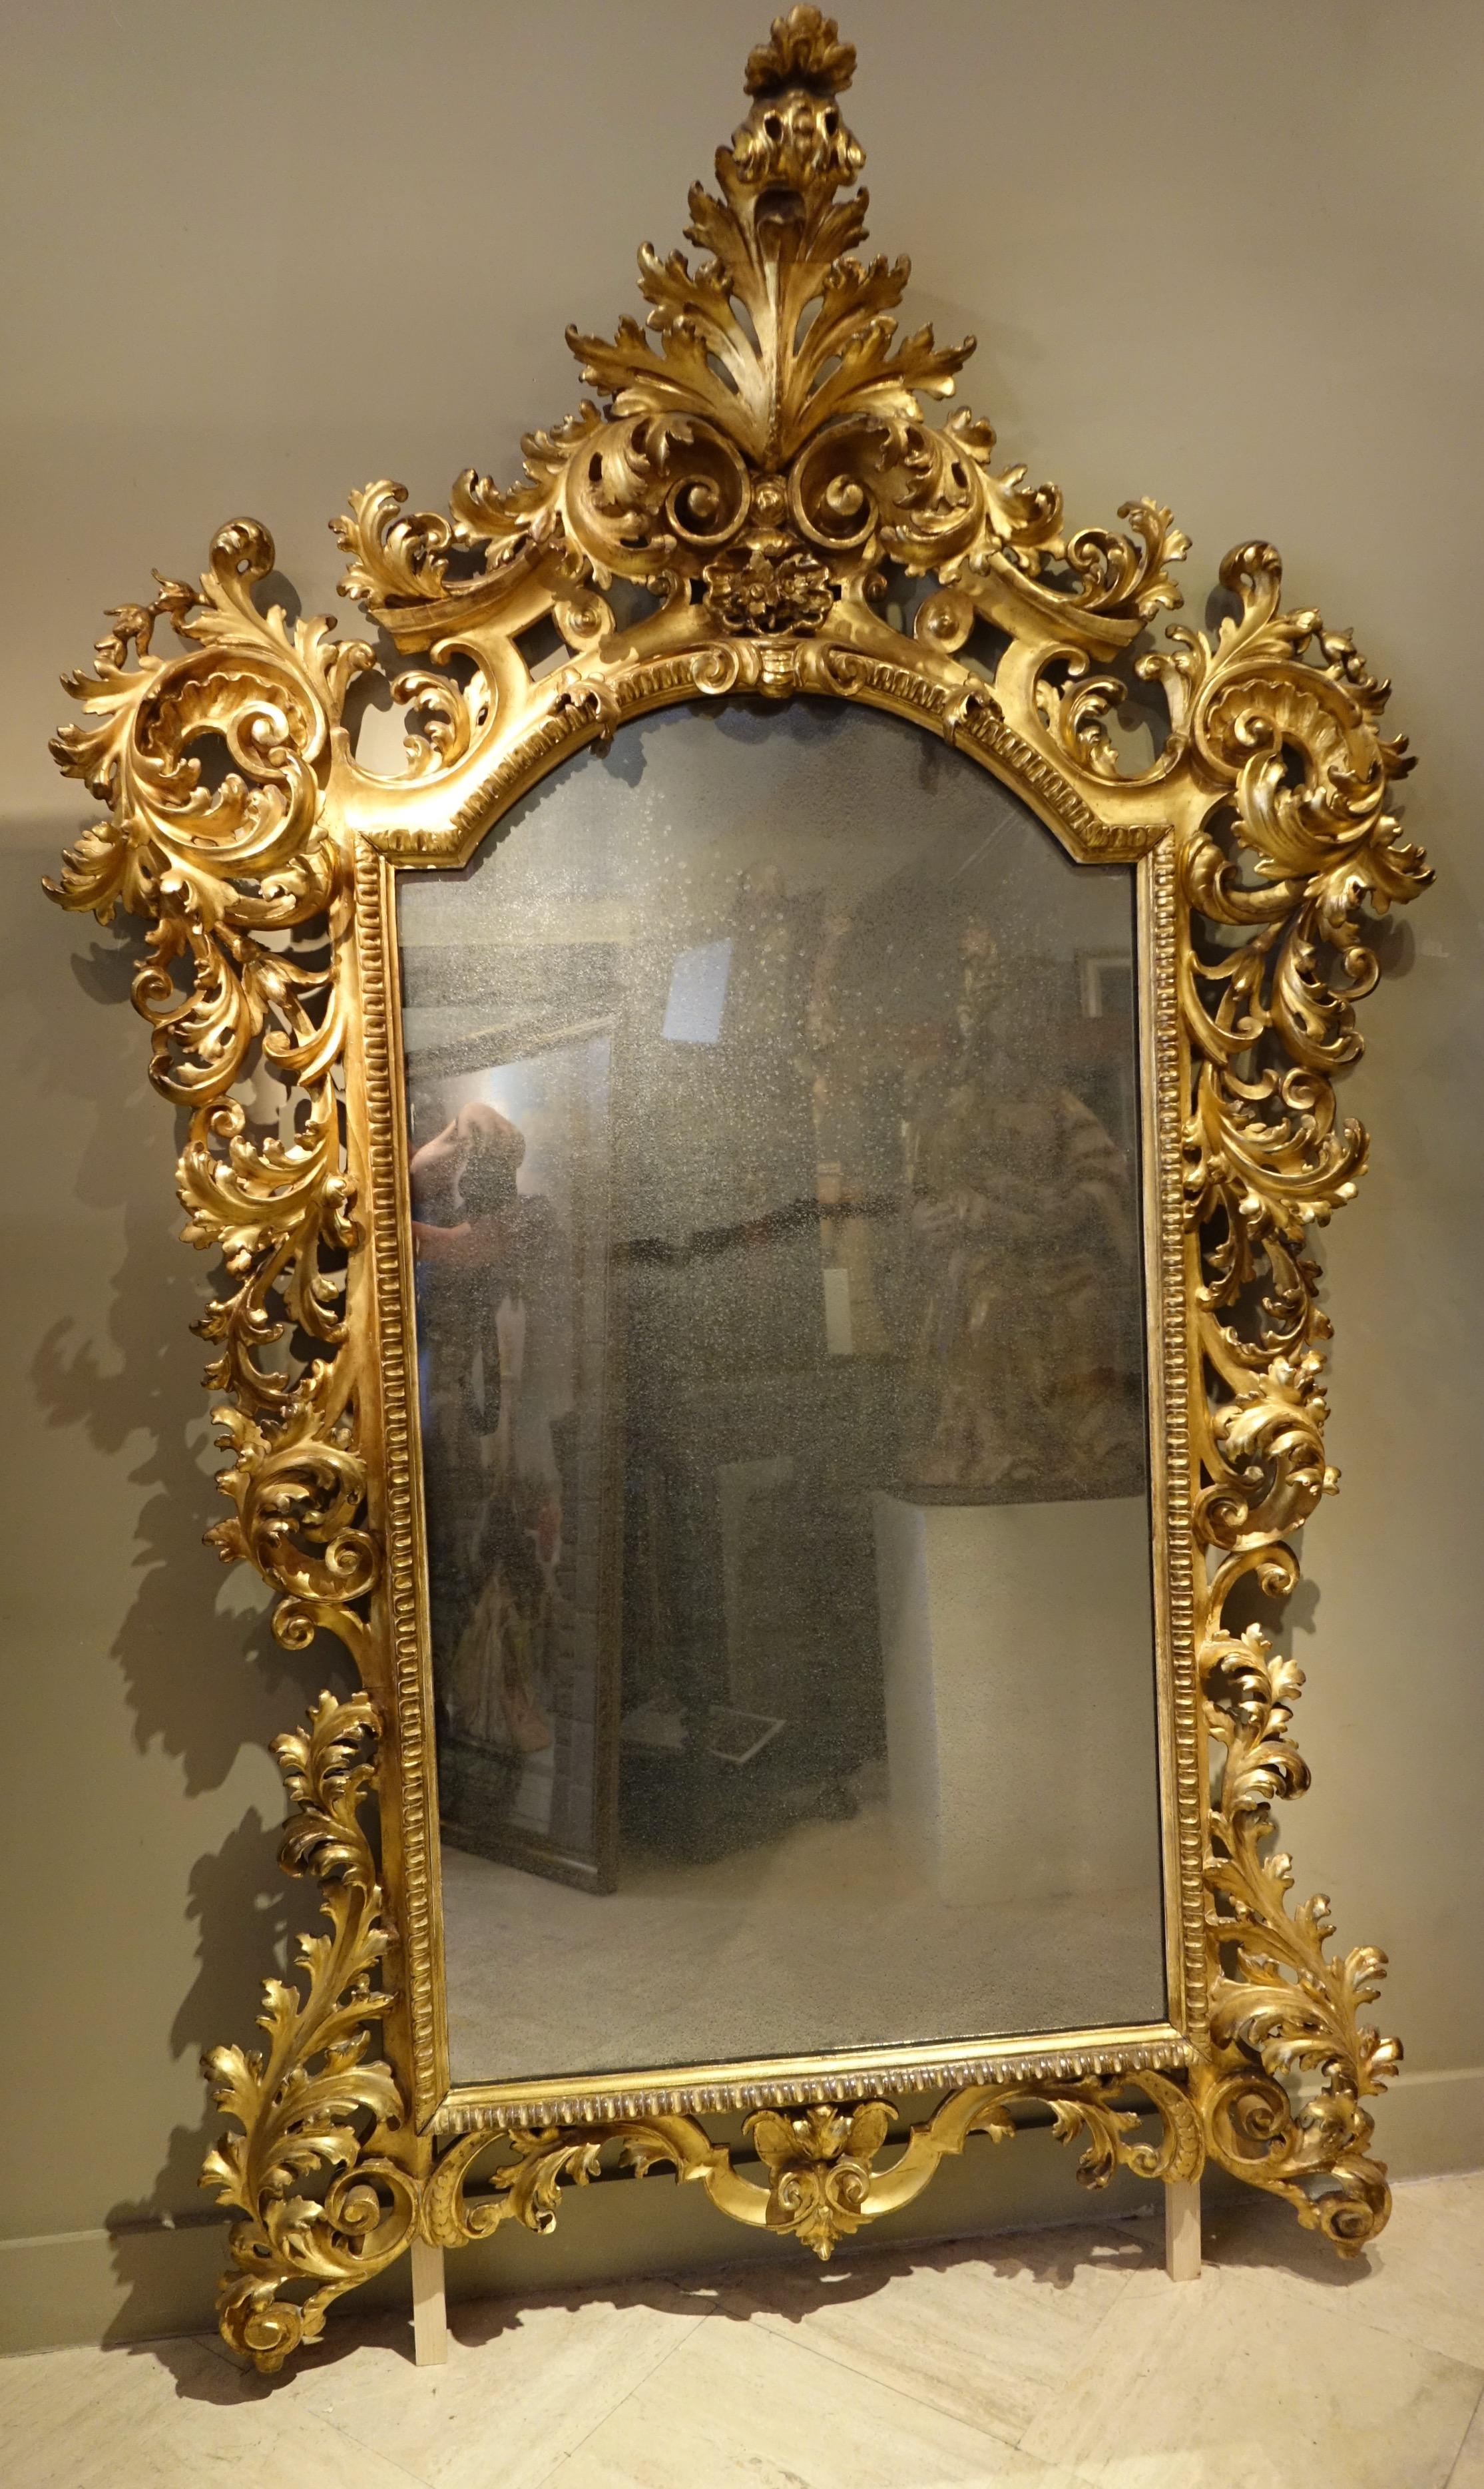 Large carved and gilded wood mirror with scrolls and foliage.
Large pediment in acanthus leaf.
Beautiful impression of lightness due to the openwork on the four sides.
Mirror with mercury, not original parquetry at the back.
Southern Italy, probably